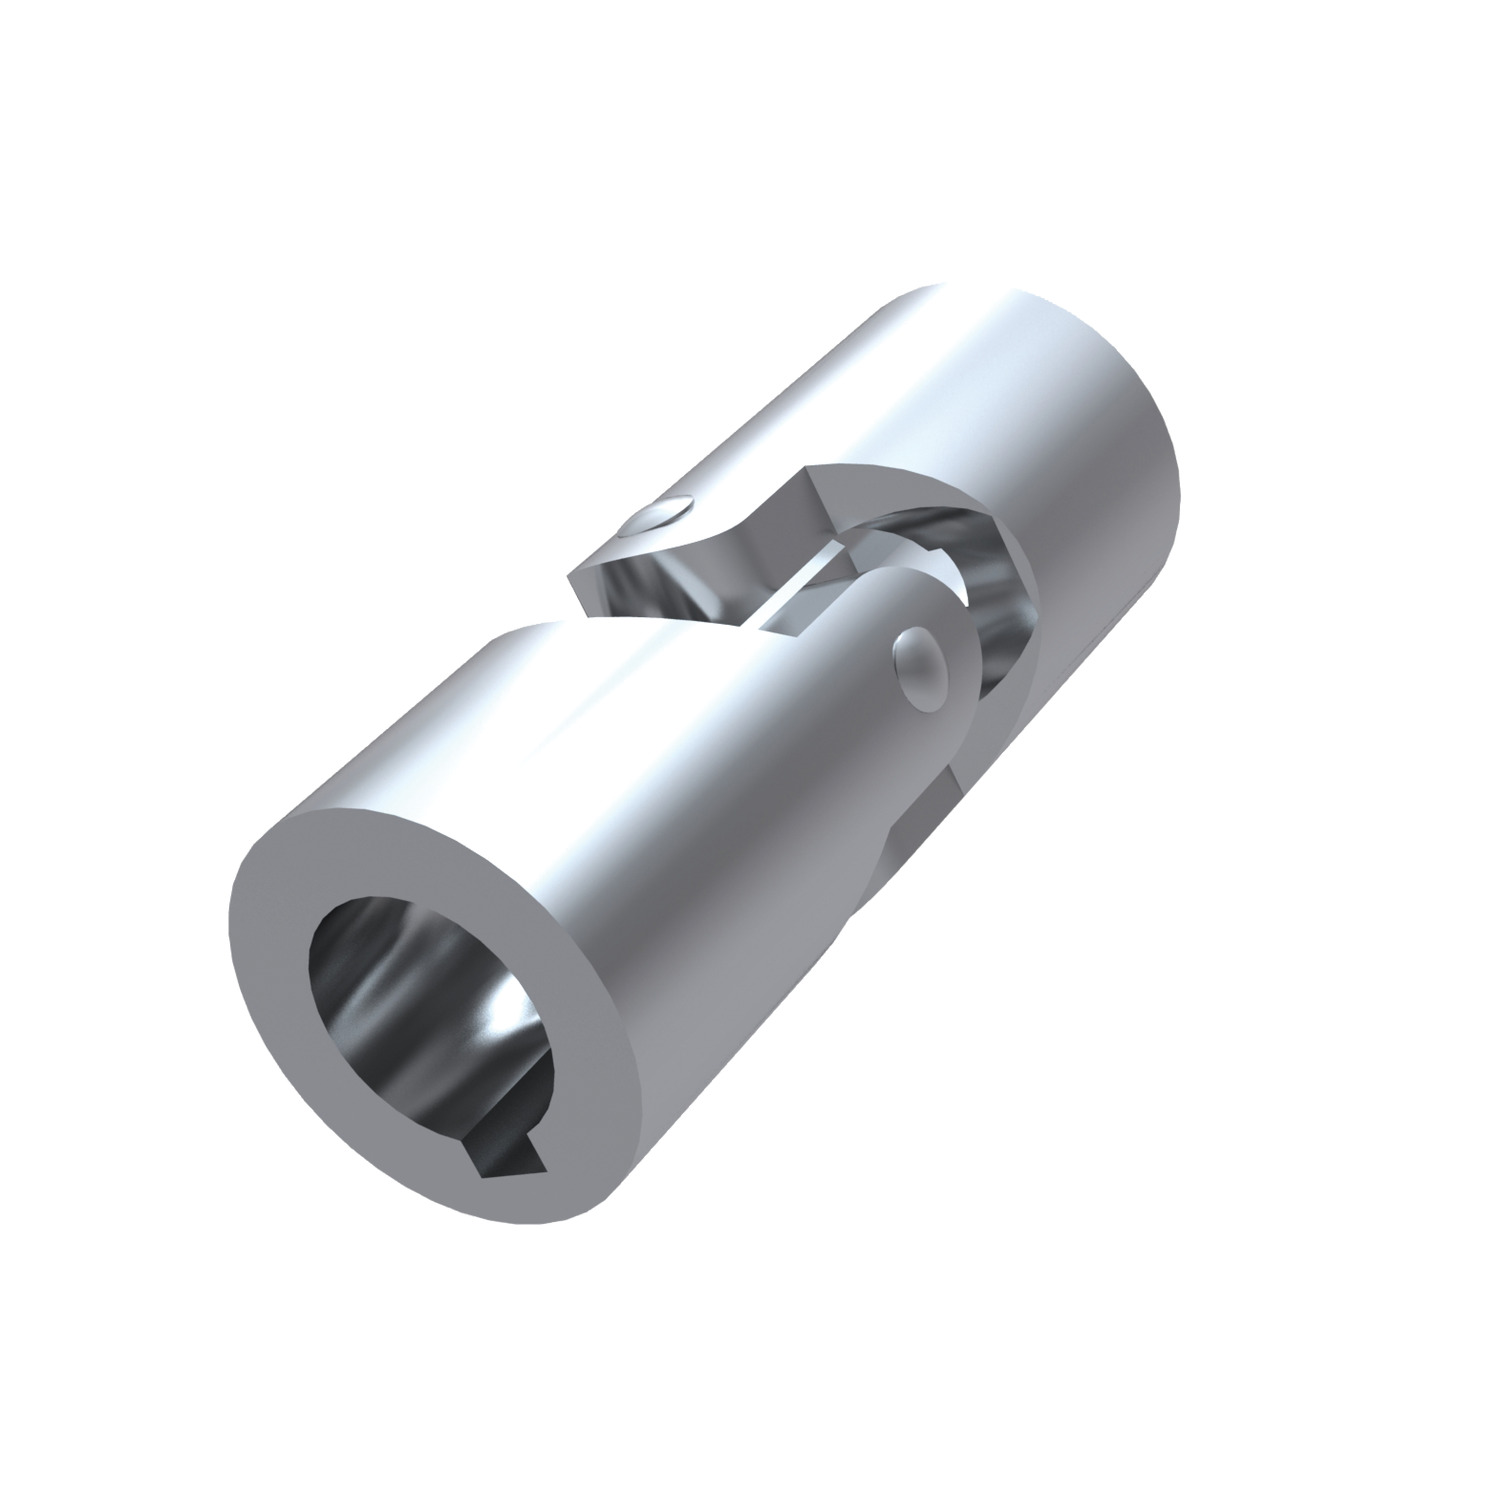 Single Universal Joint Single universal joint typically smaller OD and longer than comparative bore size of R3689.